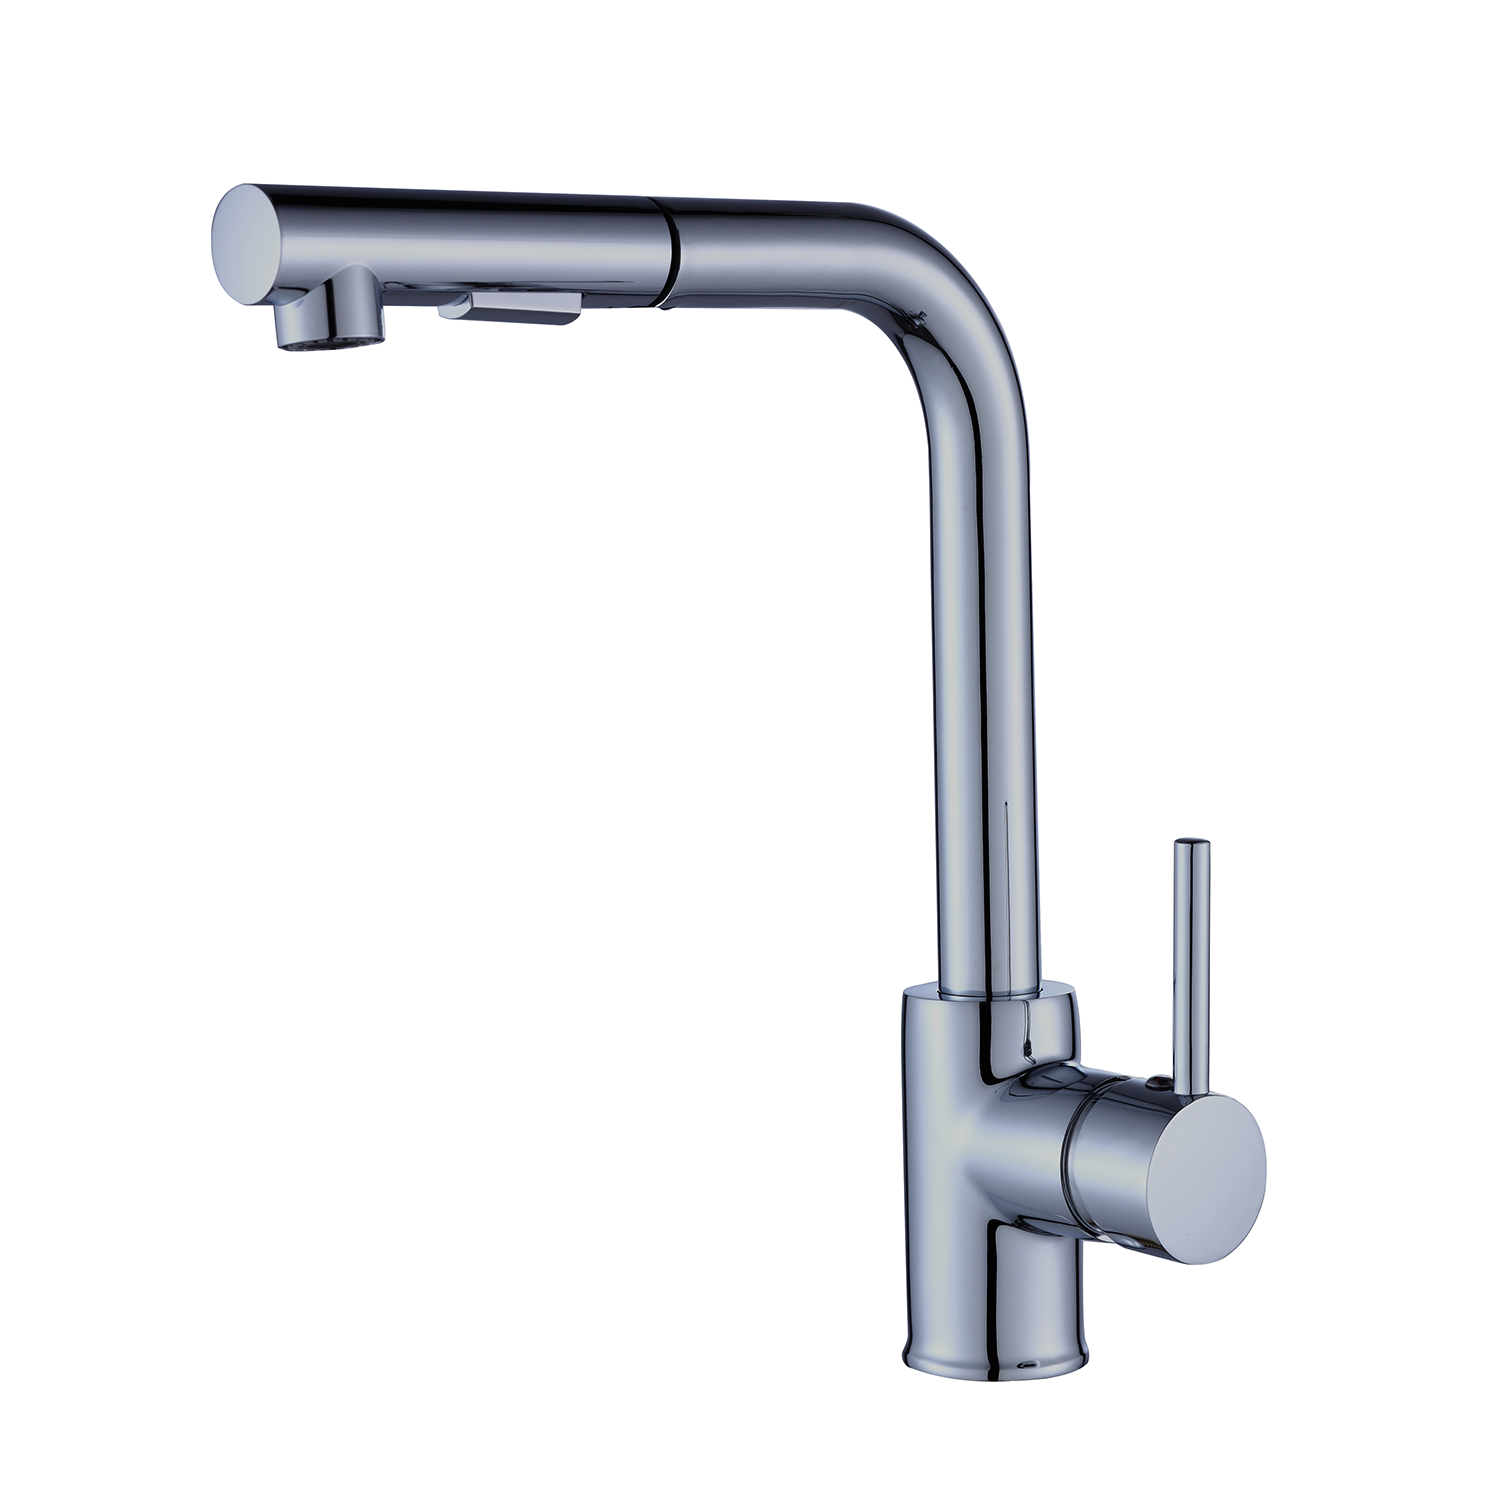 DAX Single Handle Pull Out Kitchen Faucet Brushed Nickel Finish (DAX-8213-BN)